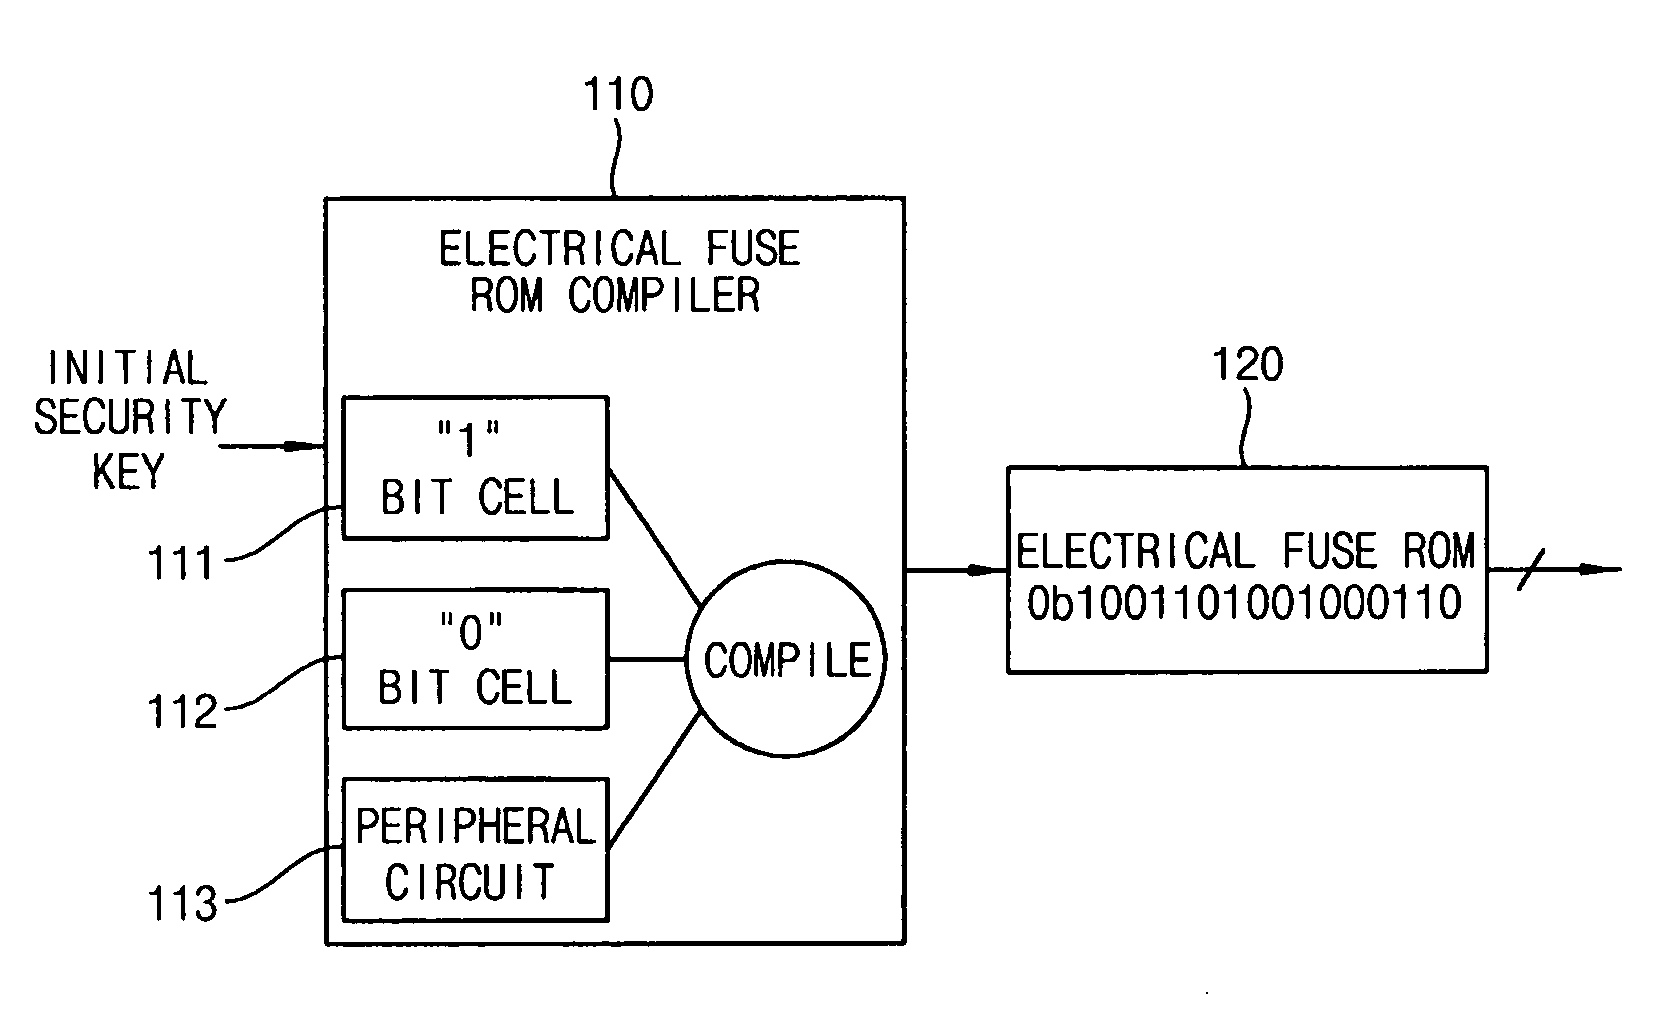 Security circuit having an electrical fuse ROM